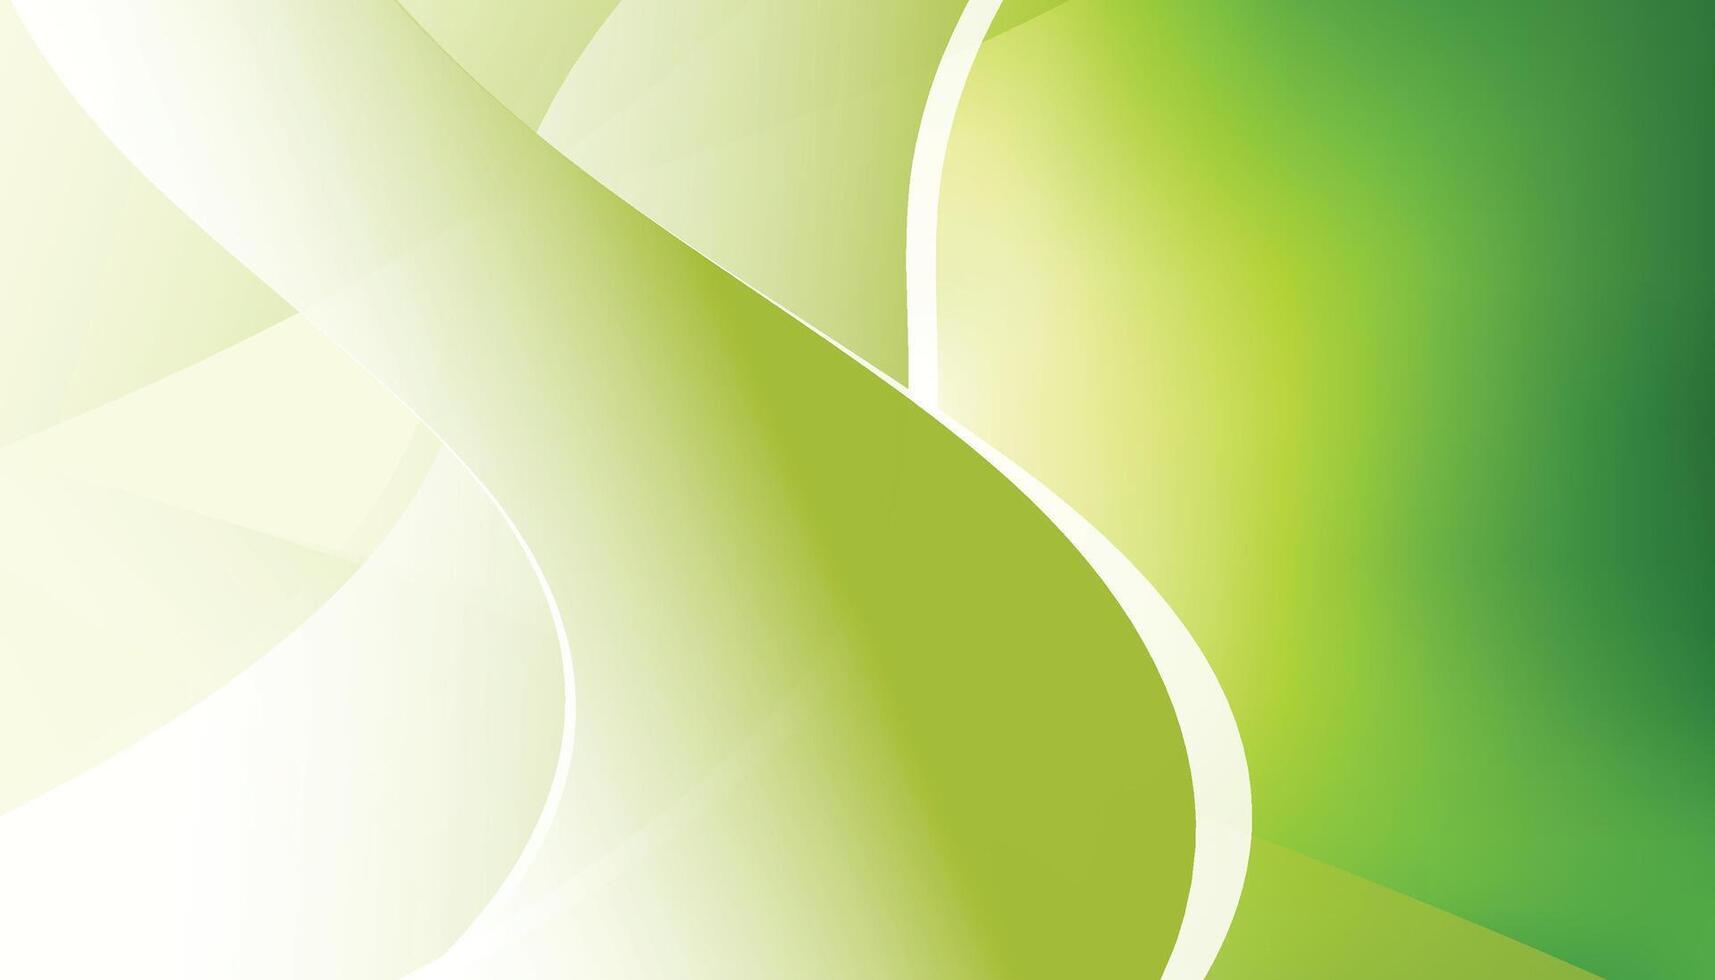 Green wallpaper and background download free vector